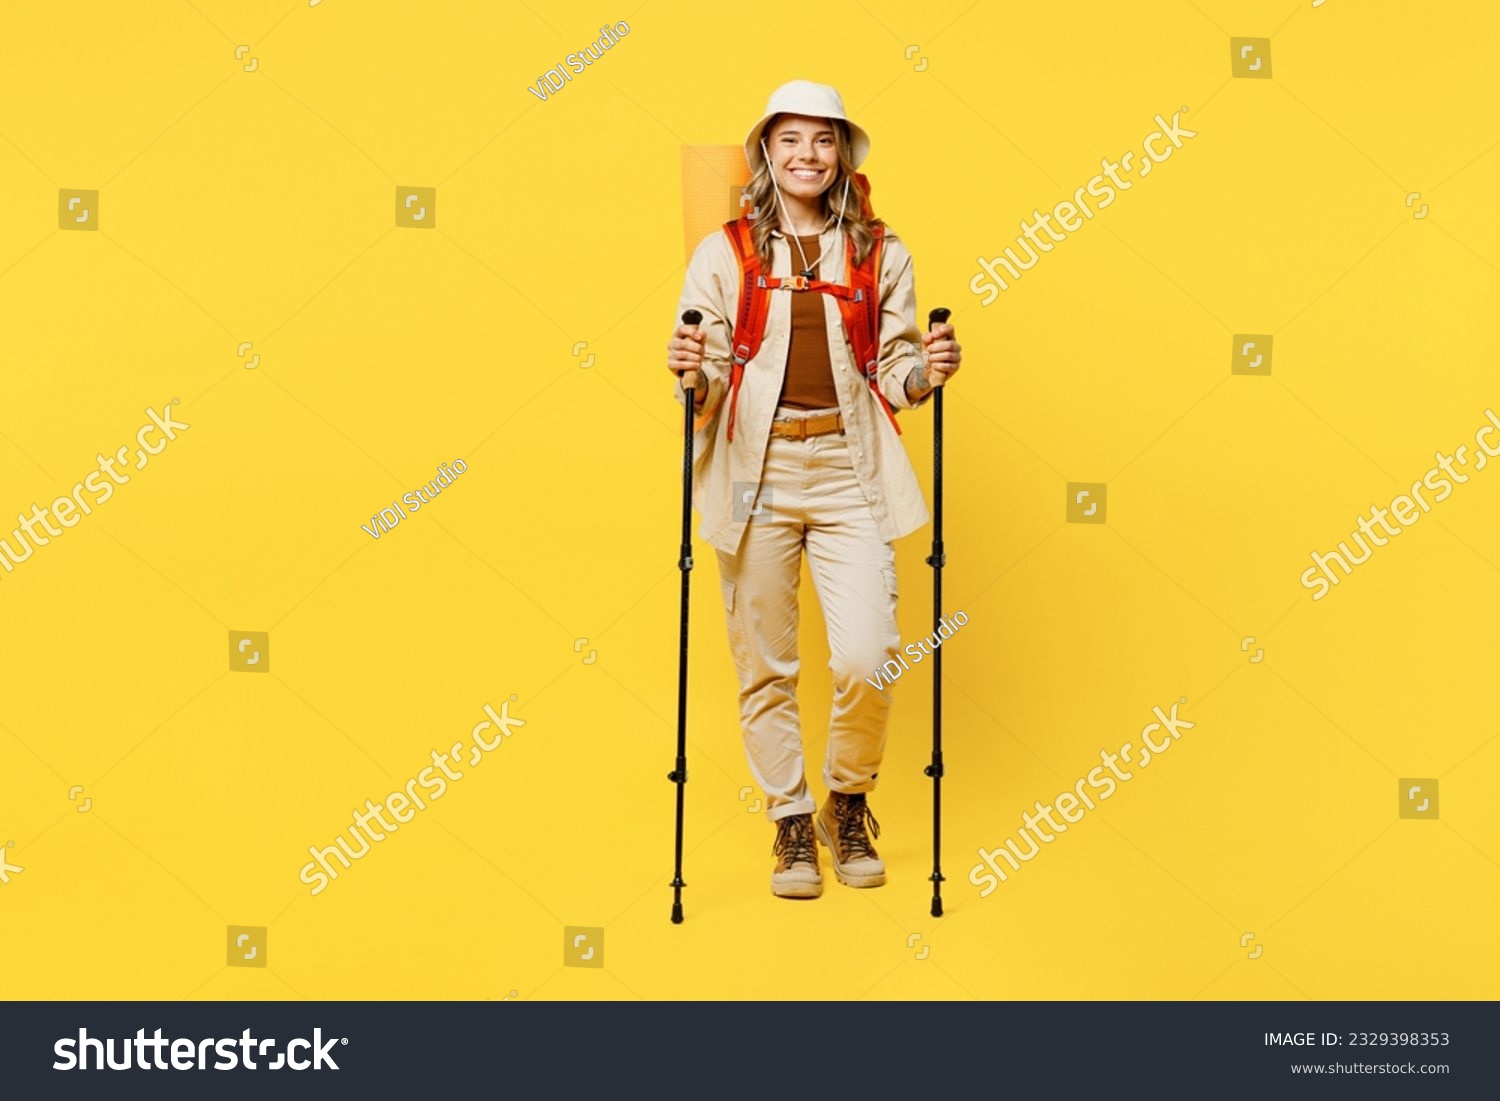 Full body smiling young woman carry bag with stuff mat hold trekking poles isolated on plain yellow background. Tourist leads active lifestyle walk on spare time. Hiking trek rest travel trip concept #2329398353